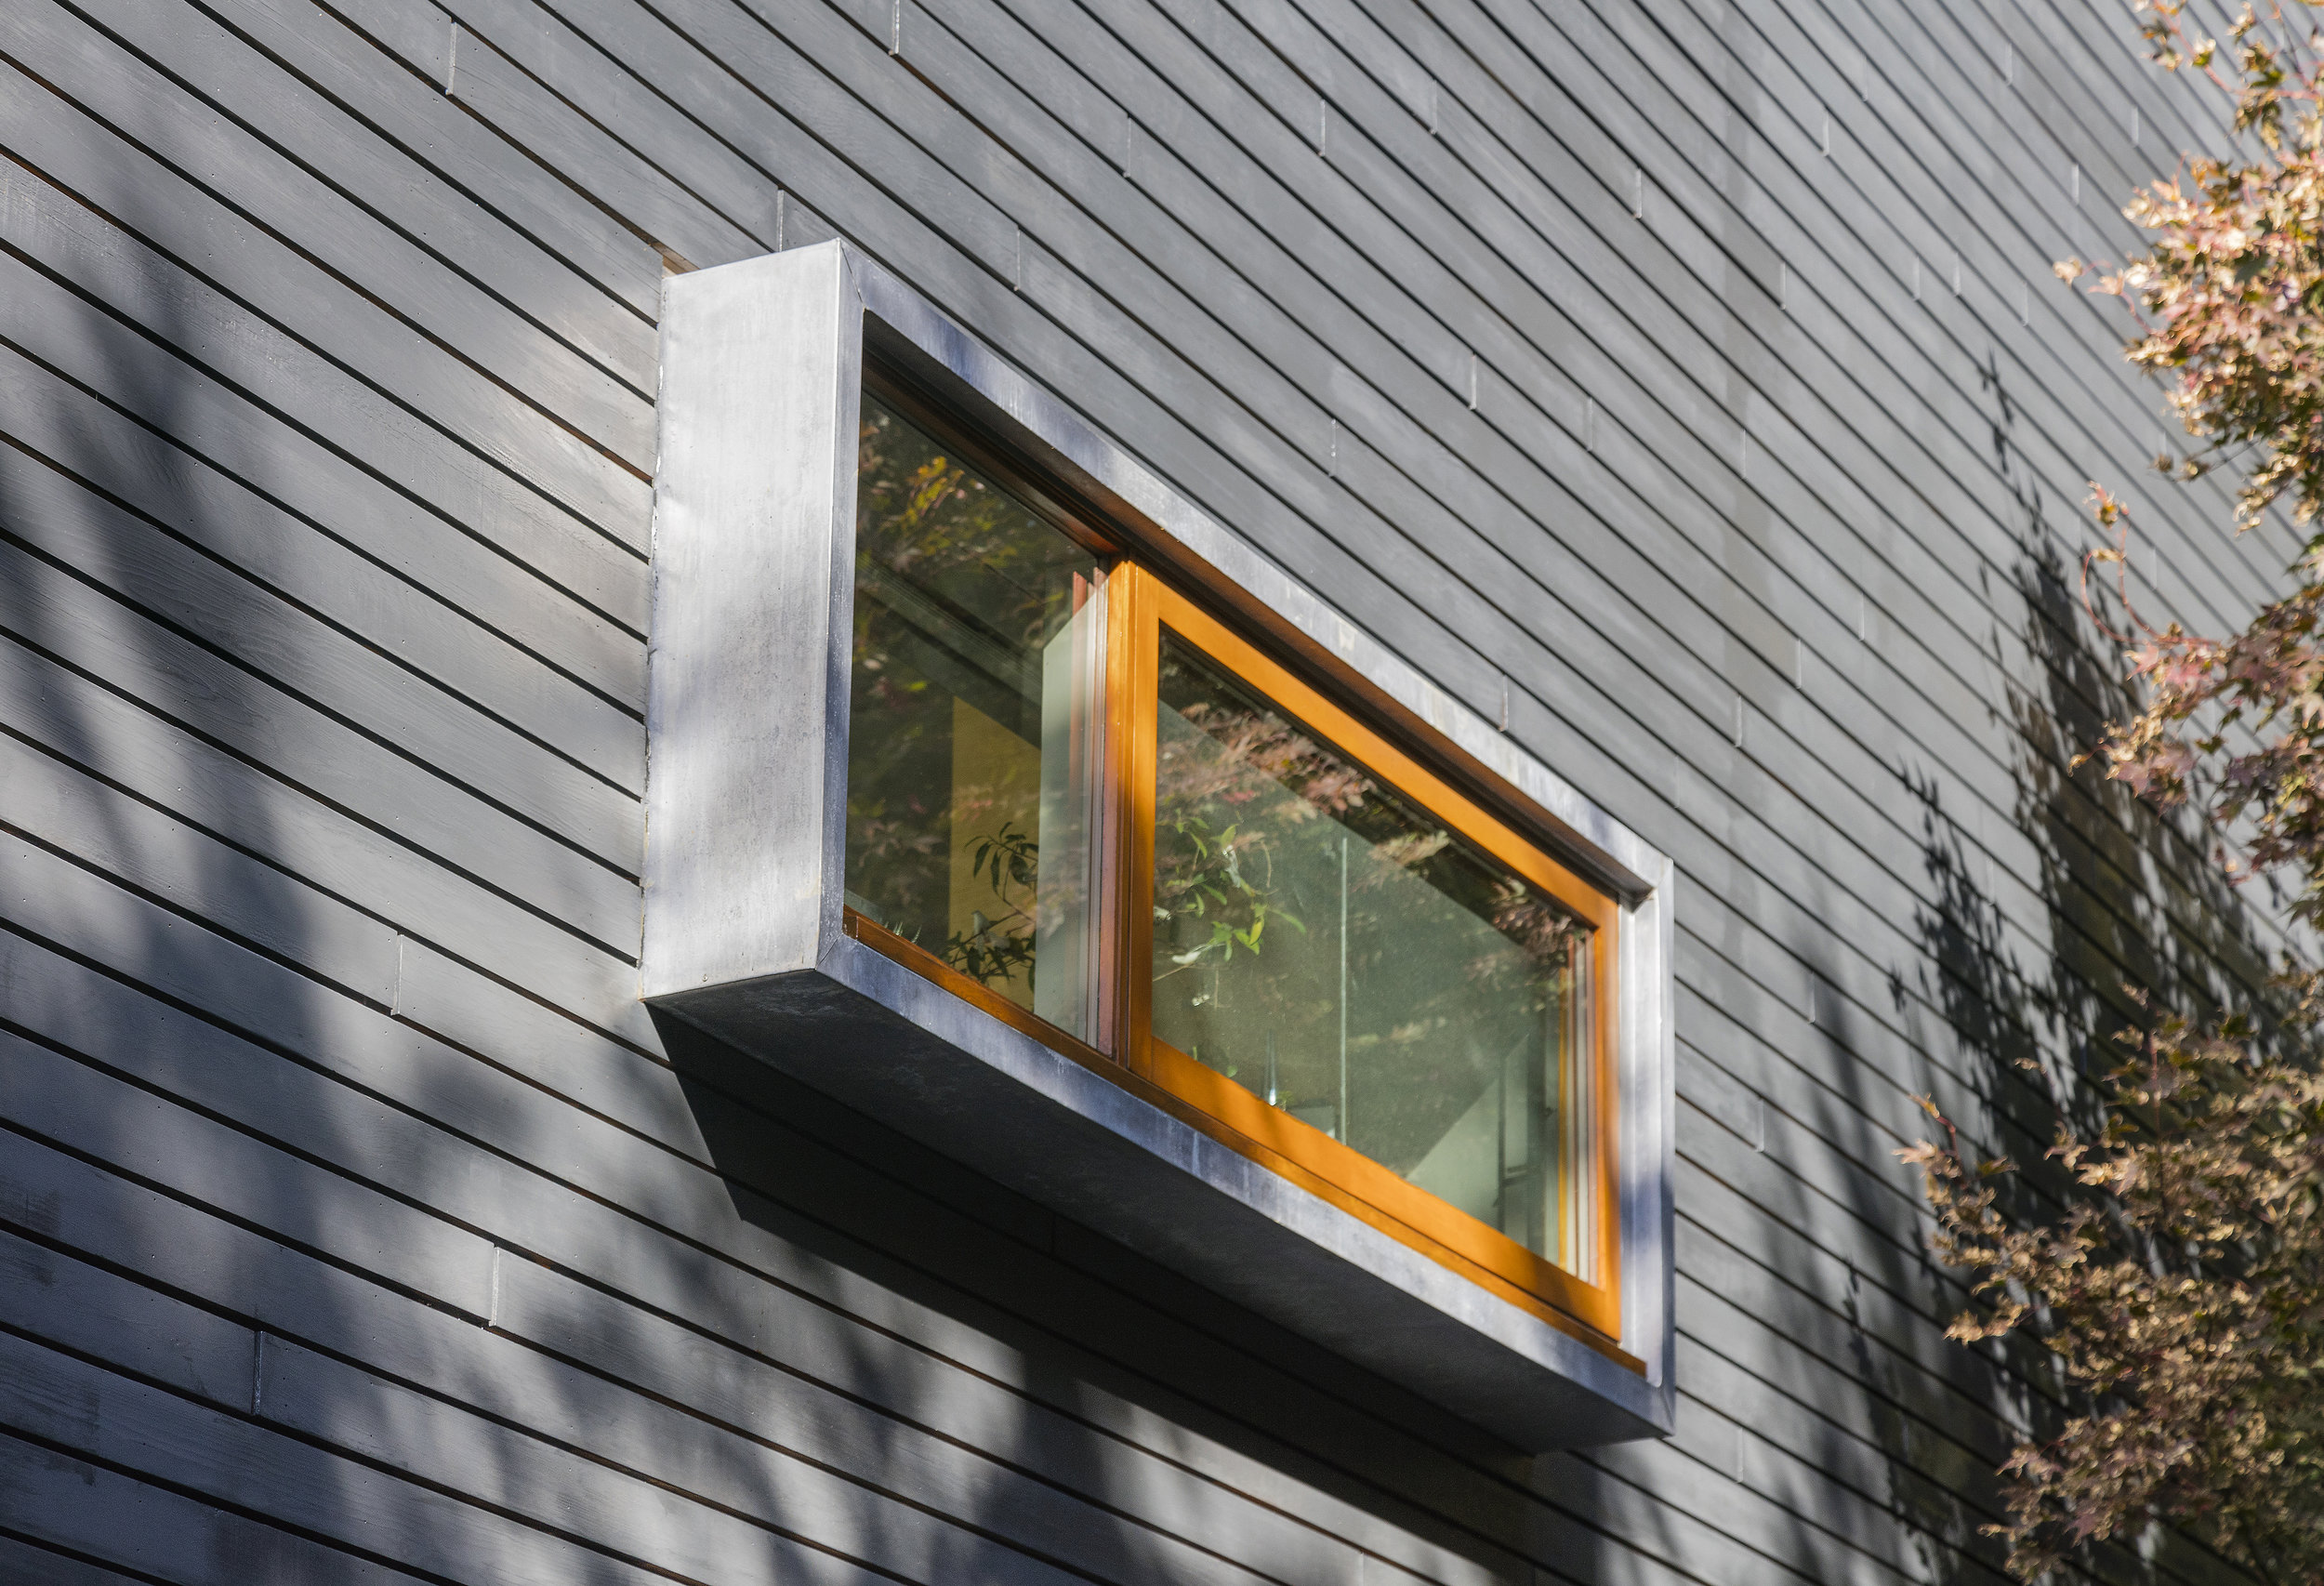 extruded sliding window modern architecture design in fairfield county ct